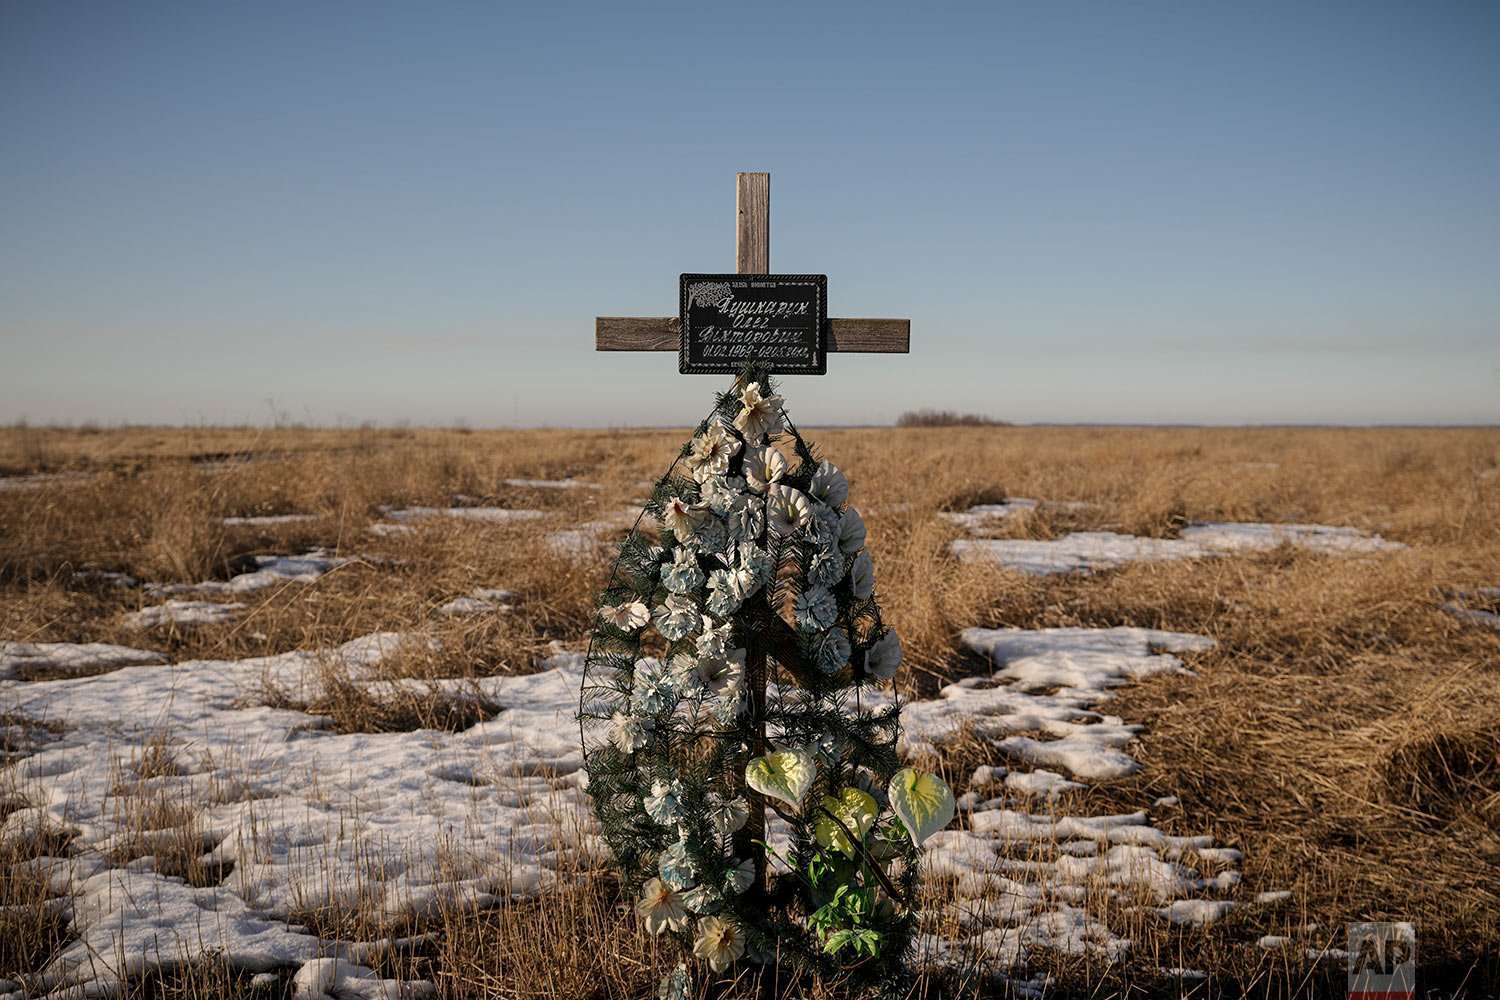  A cross in memory of a Ukrainian soldier is placed in a field near the place he was killed on in 2018, at a front line position outside Popasna, Luhansk region, eastern Ukraine, Monday, Feb. 14, 2022. (AP Photo/Vadim Ghirda) 